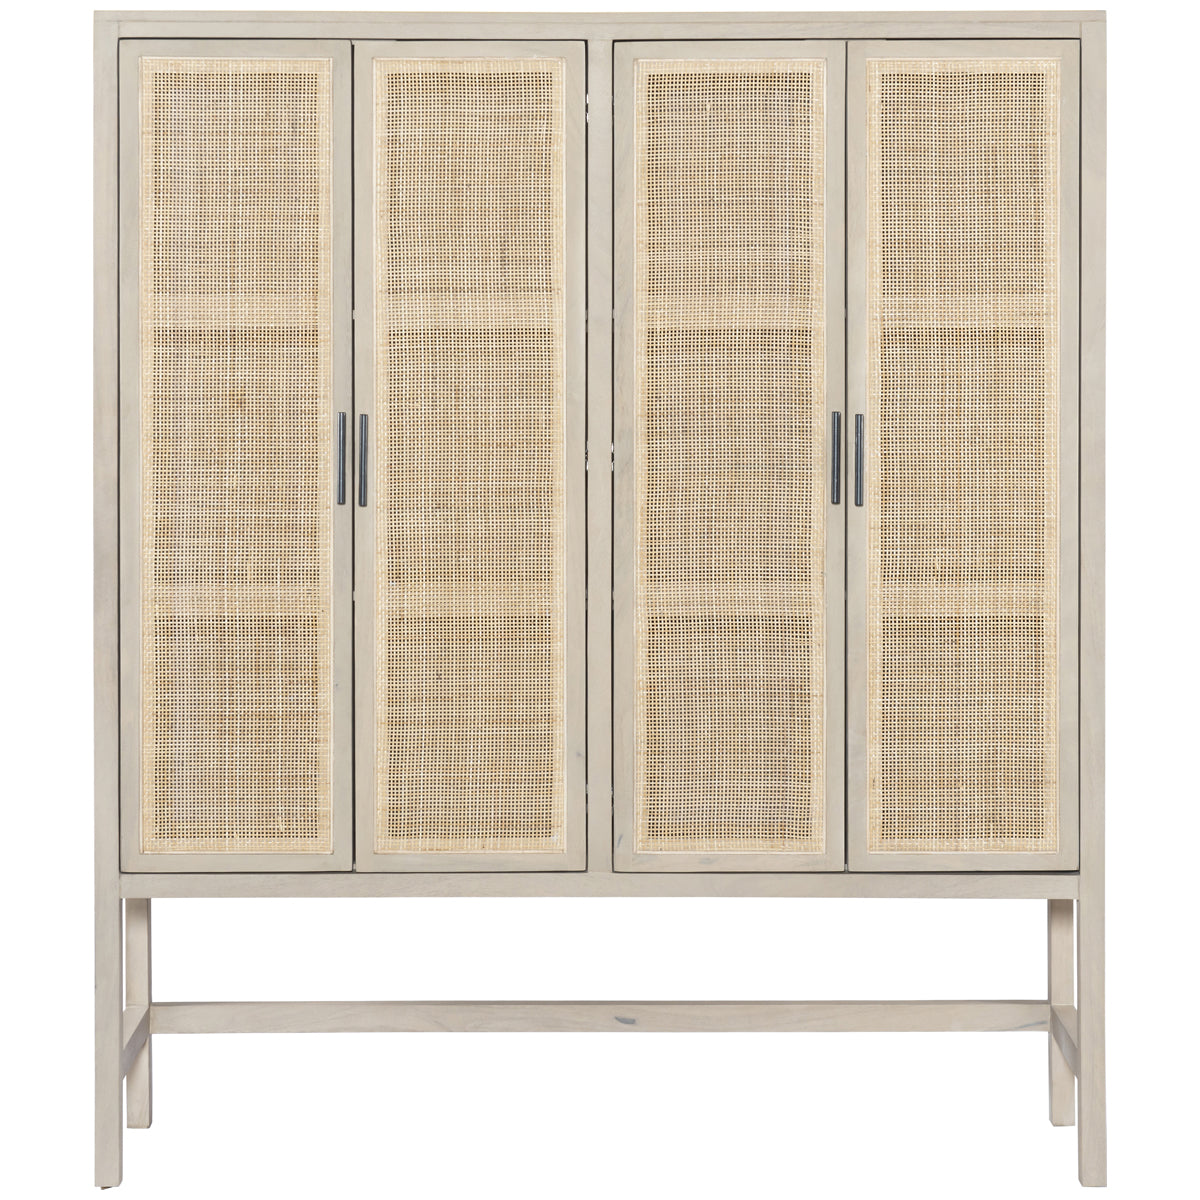 Four Hands Leighton Caprice Cabinet